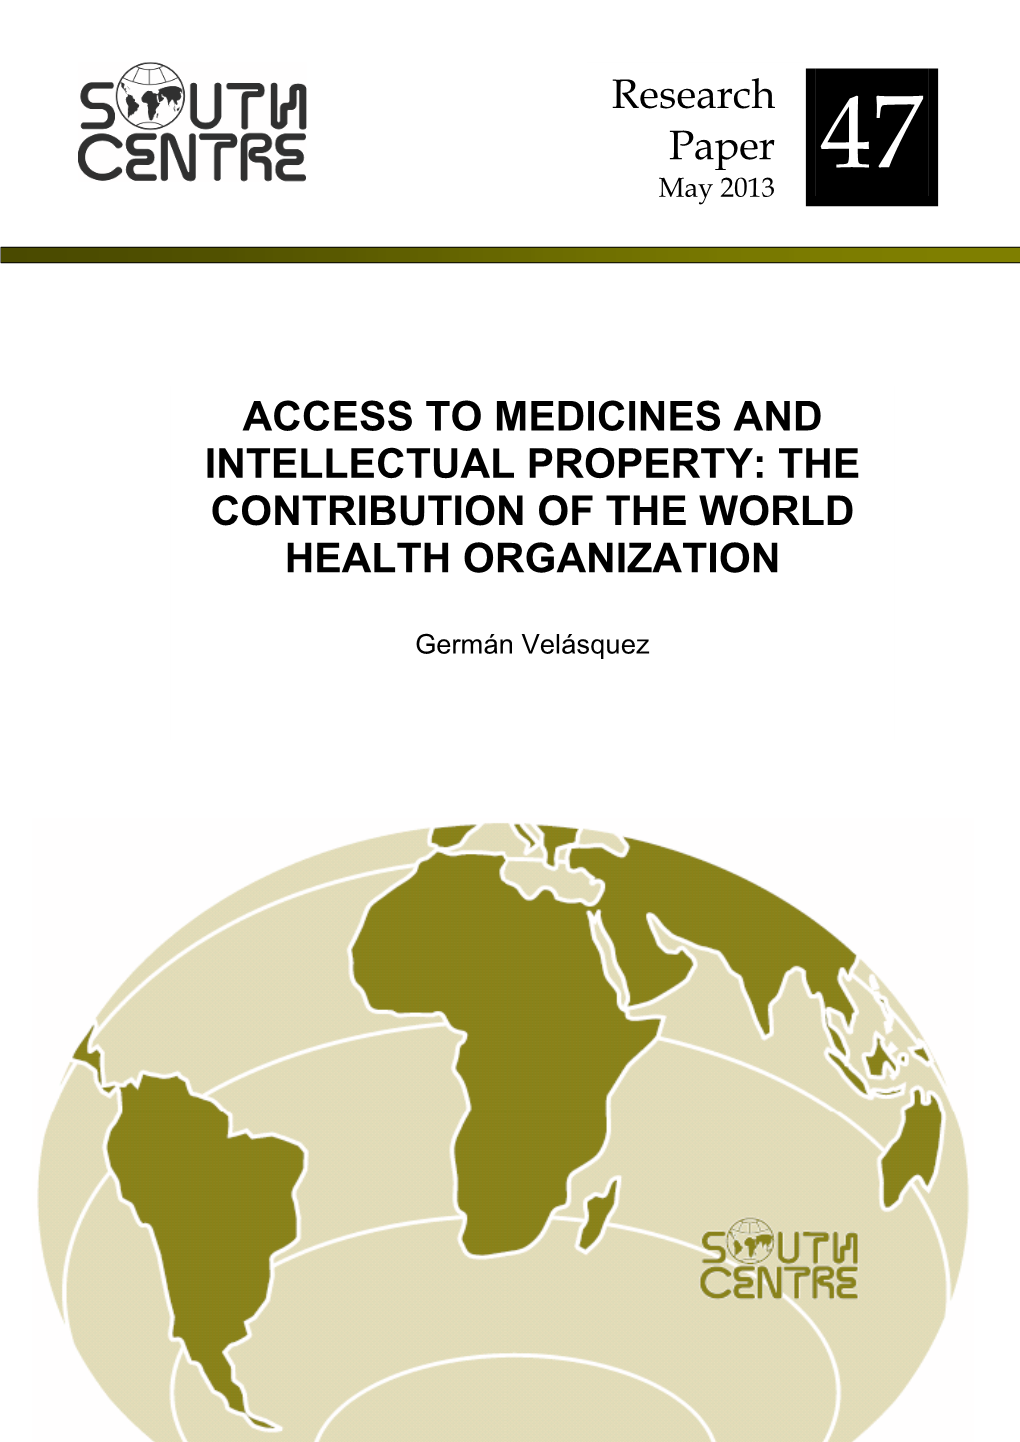 Access to Medicines and Intellectual Property: the Contribution of the World Health Organization